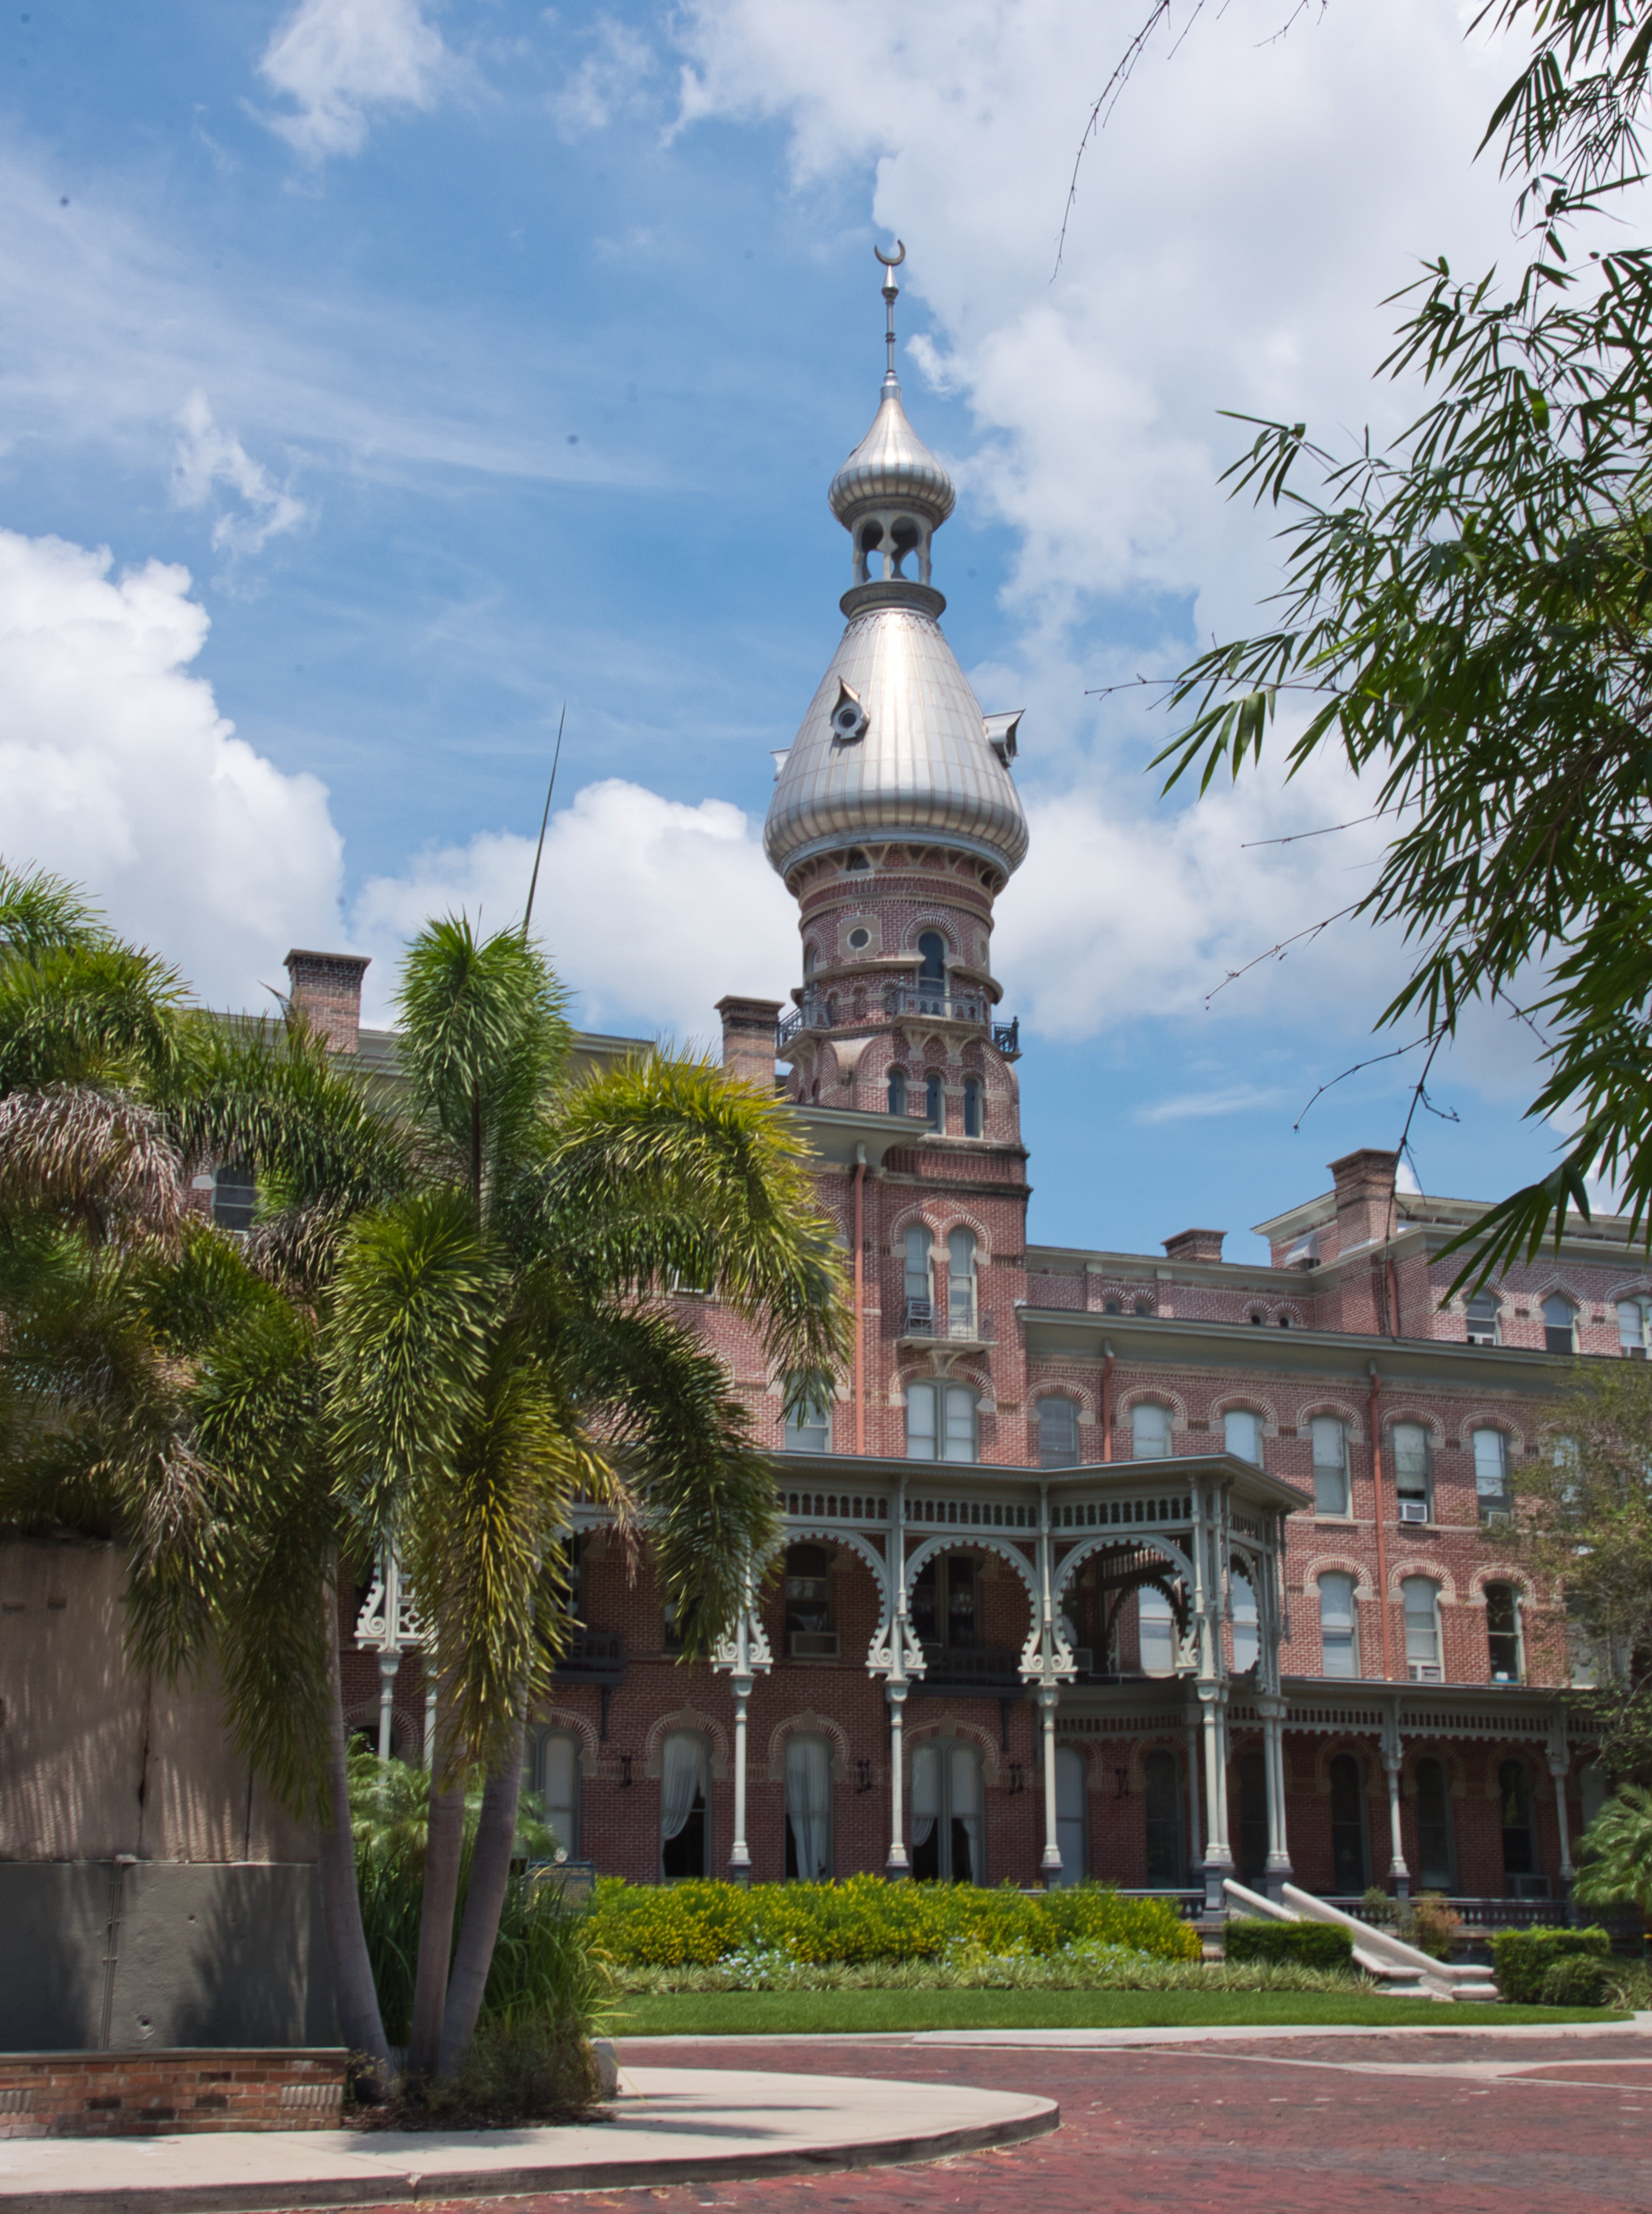 University of Tampa The Vintage Lens